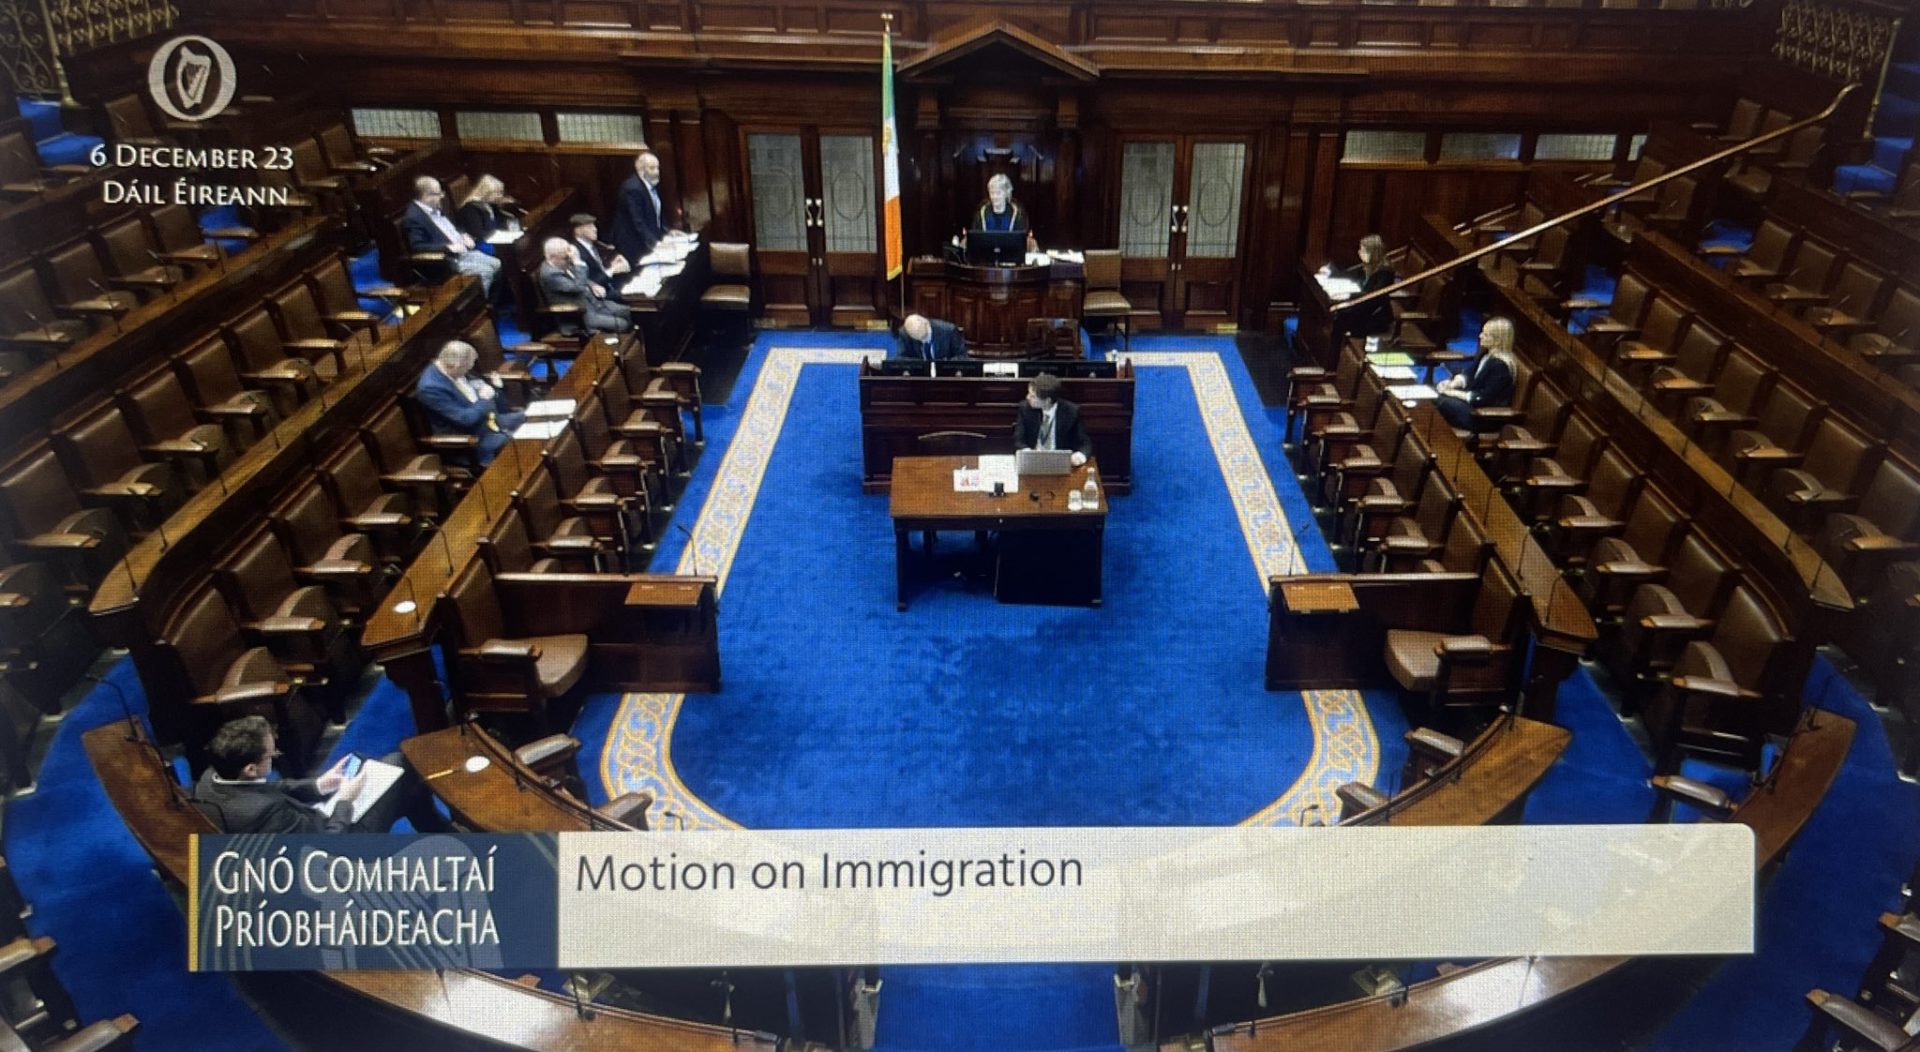 A view of the Dáil chamber during a debate on immigration, 6-12-23